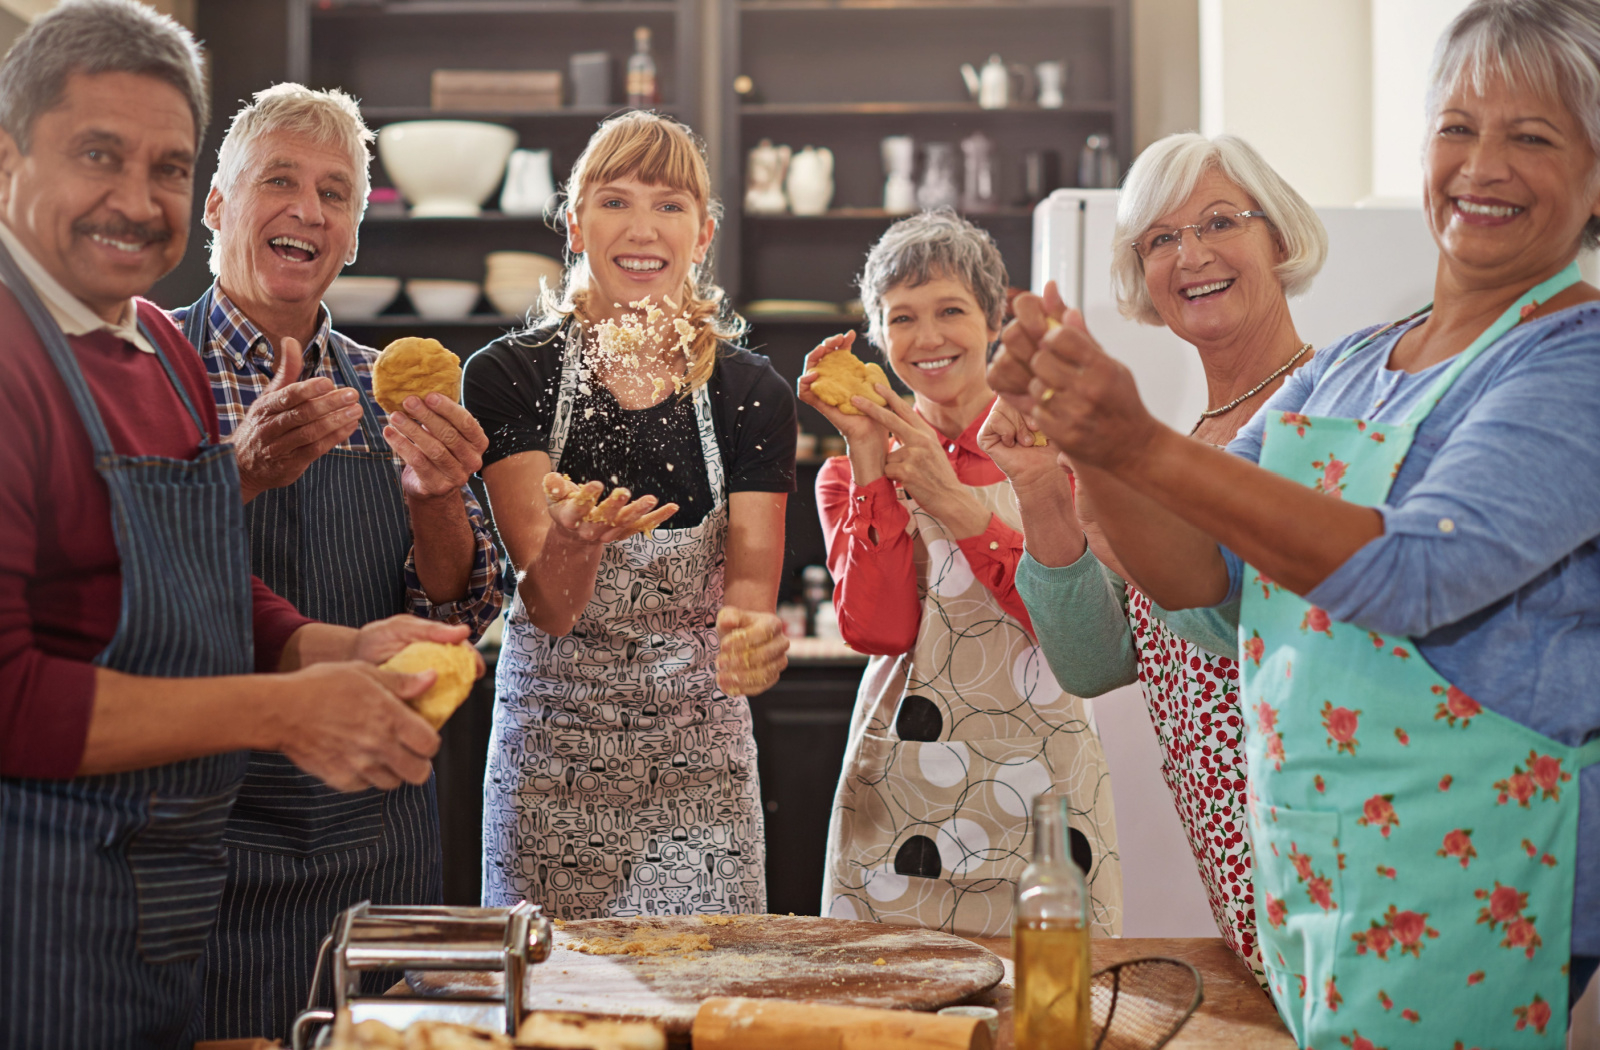 A group of older adults in a baking class with their instructor, each holding dough, smiling and looking directly at the camera
